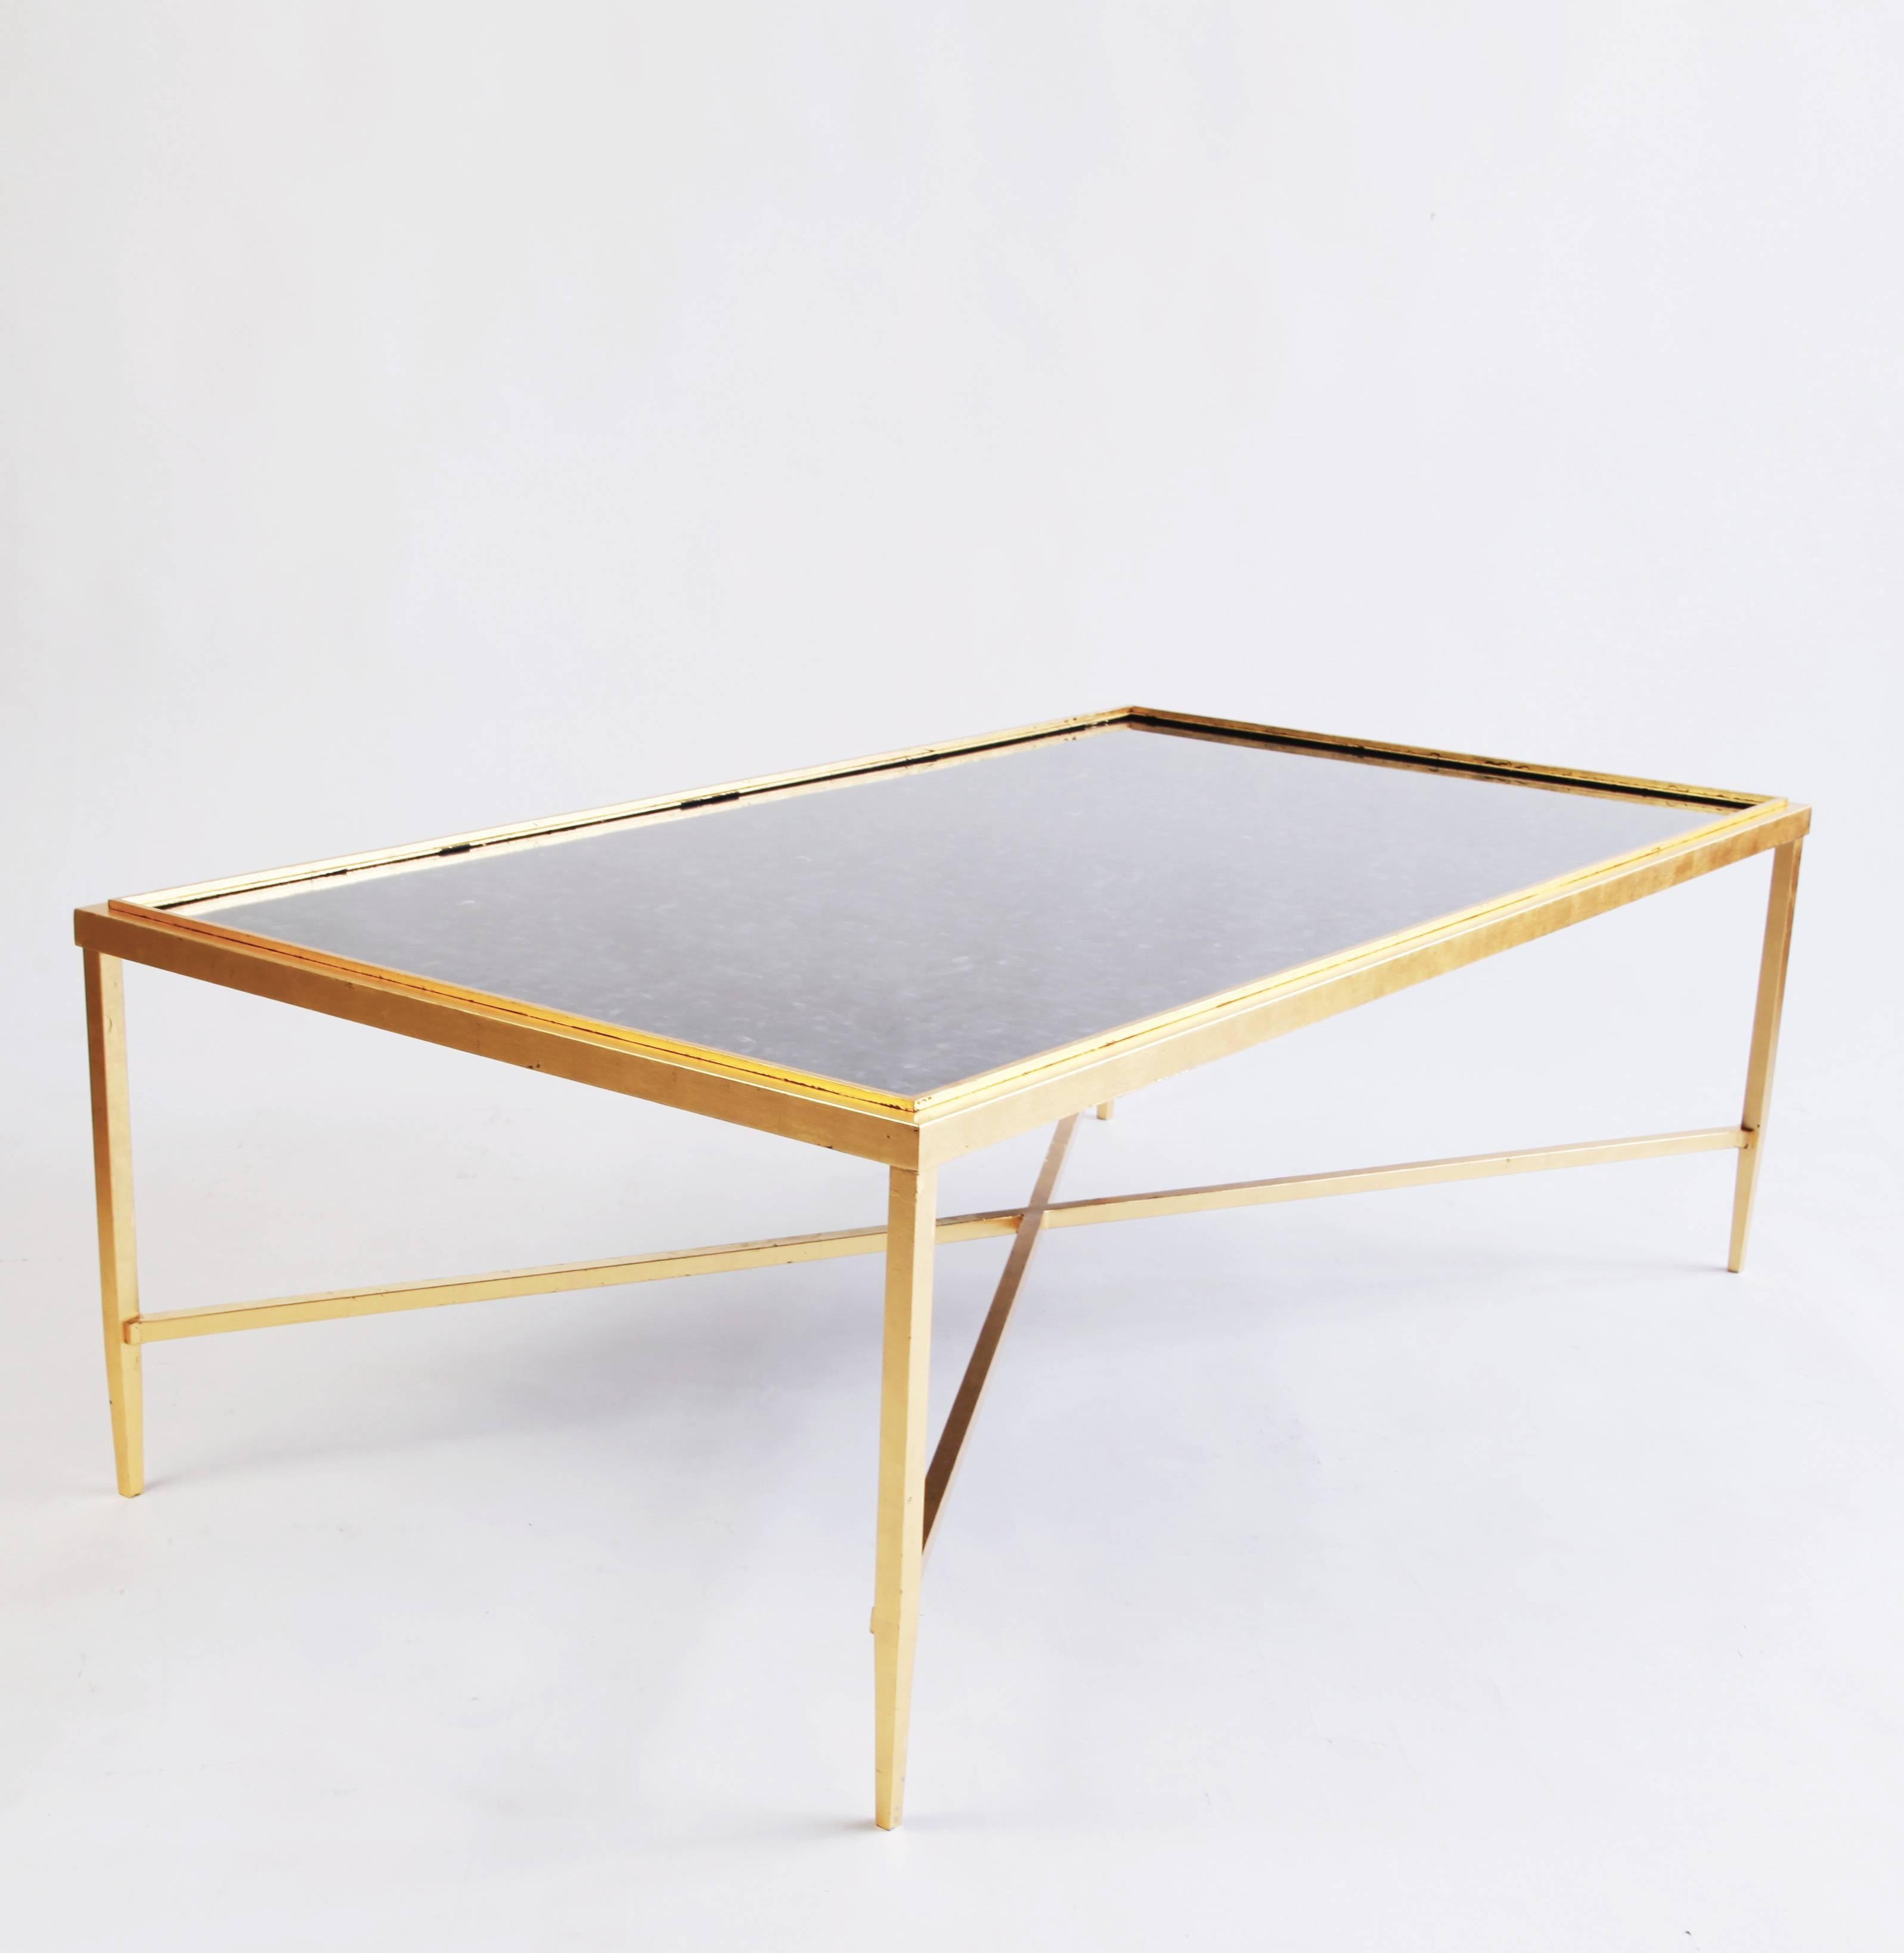 American Daedalus Table by Lawton Mull